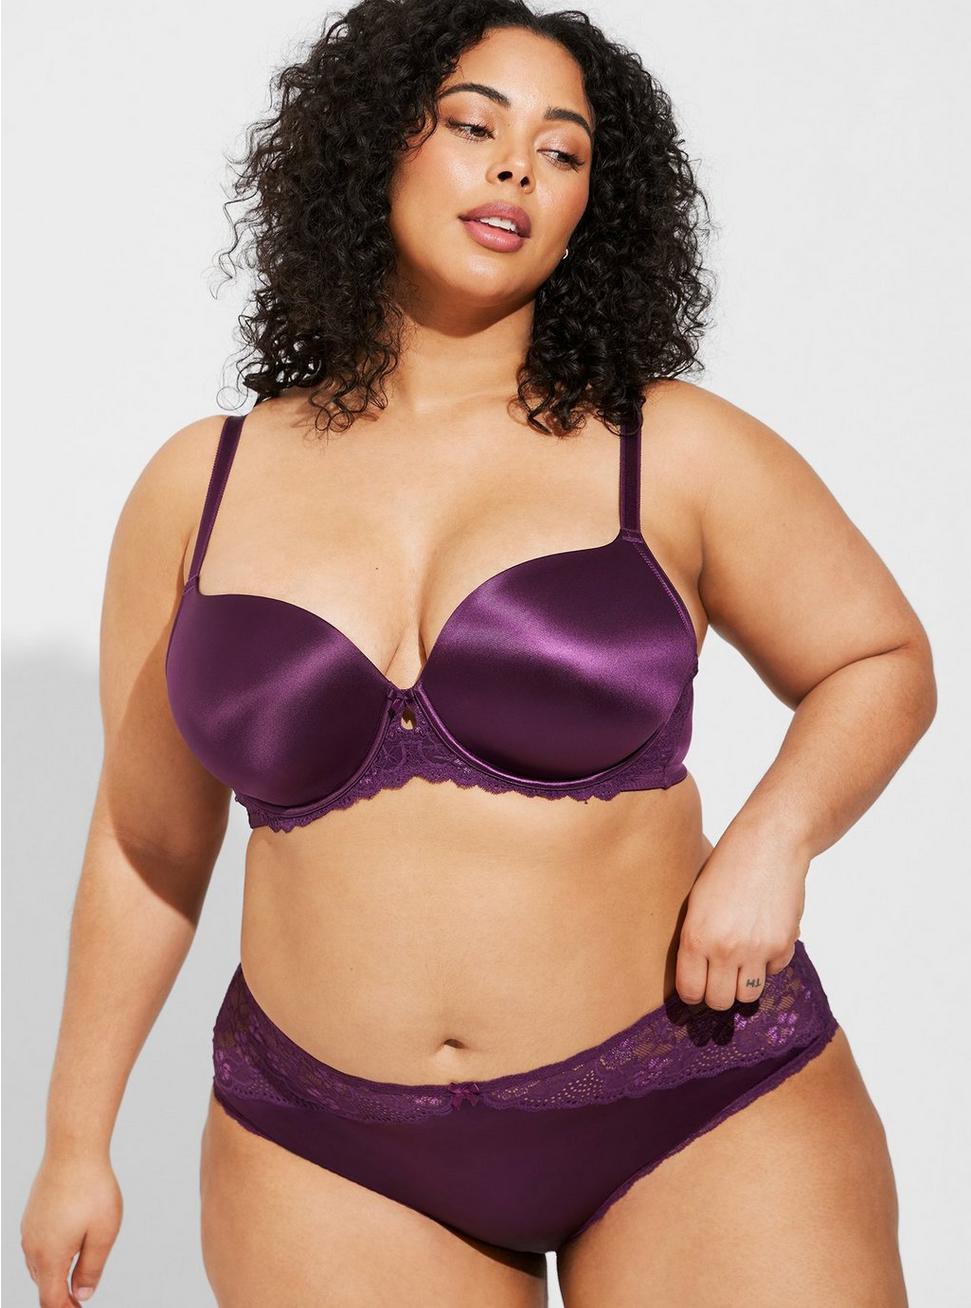 Shine And Lace Mid-Rise Cheeky Panty, DEEP PURPLE, hi-res